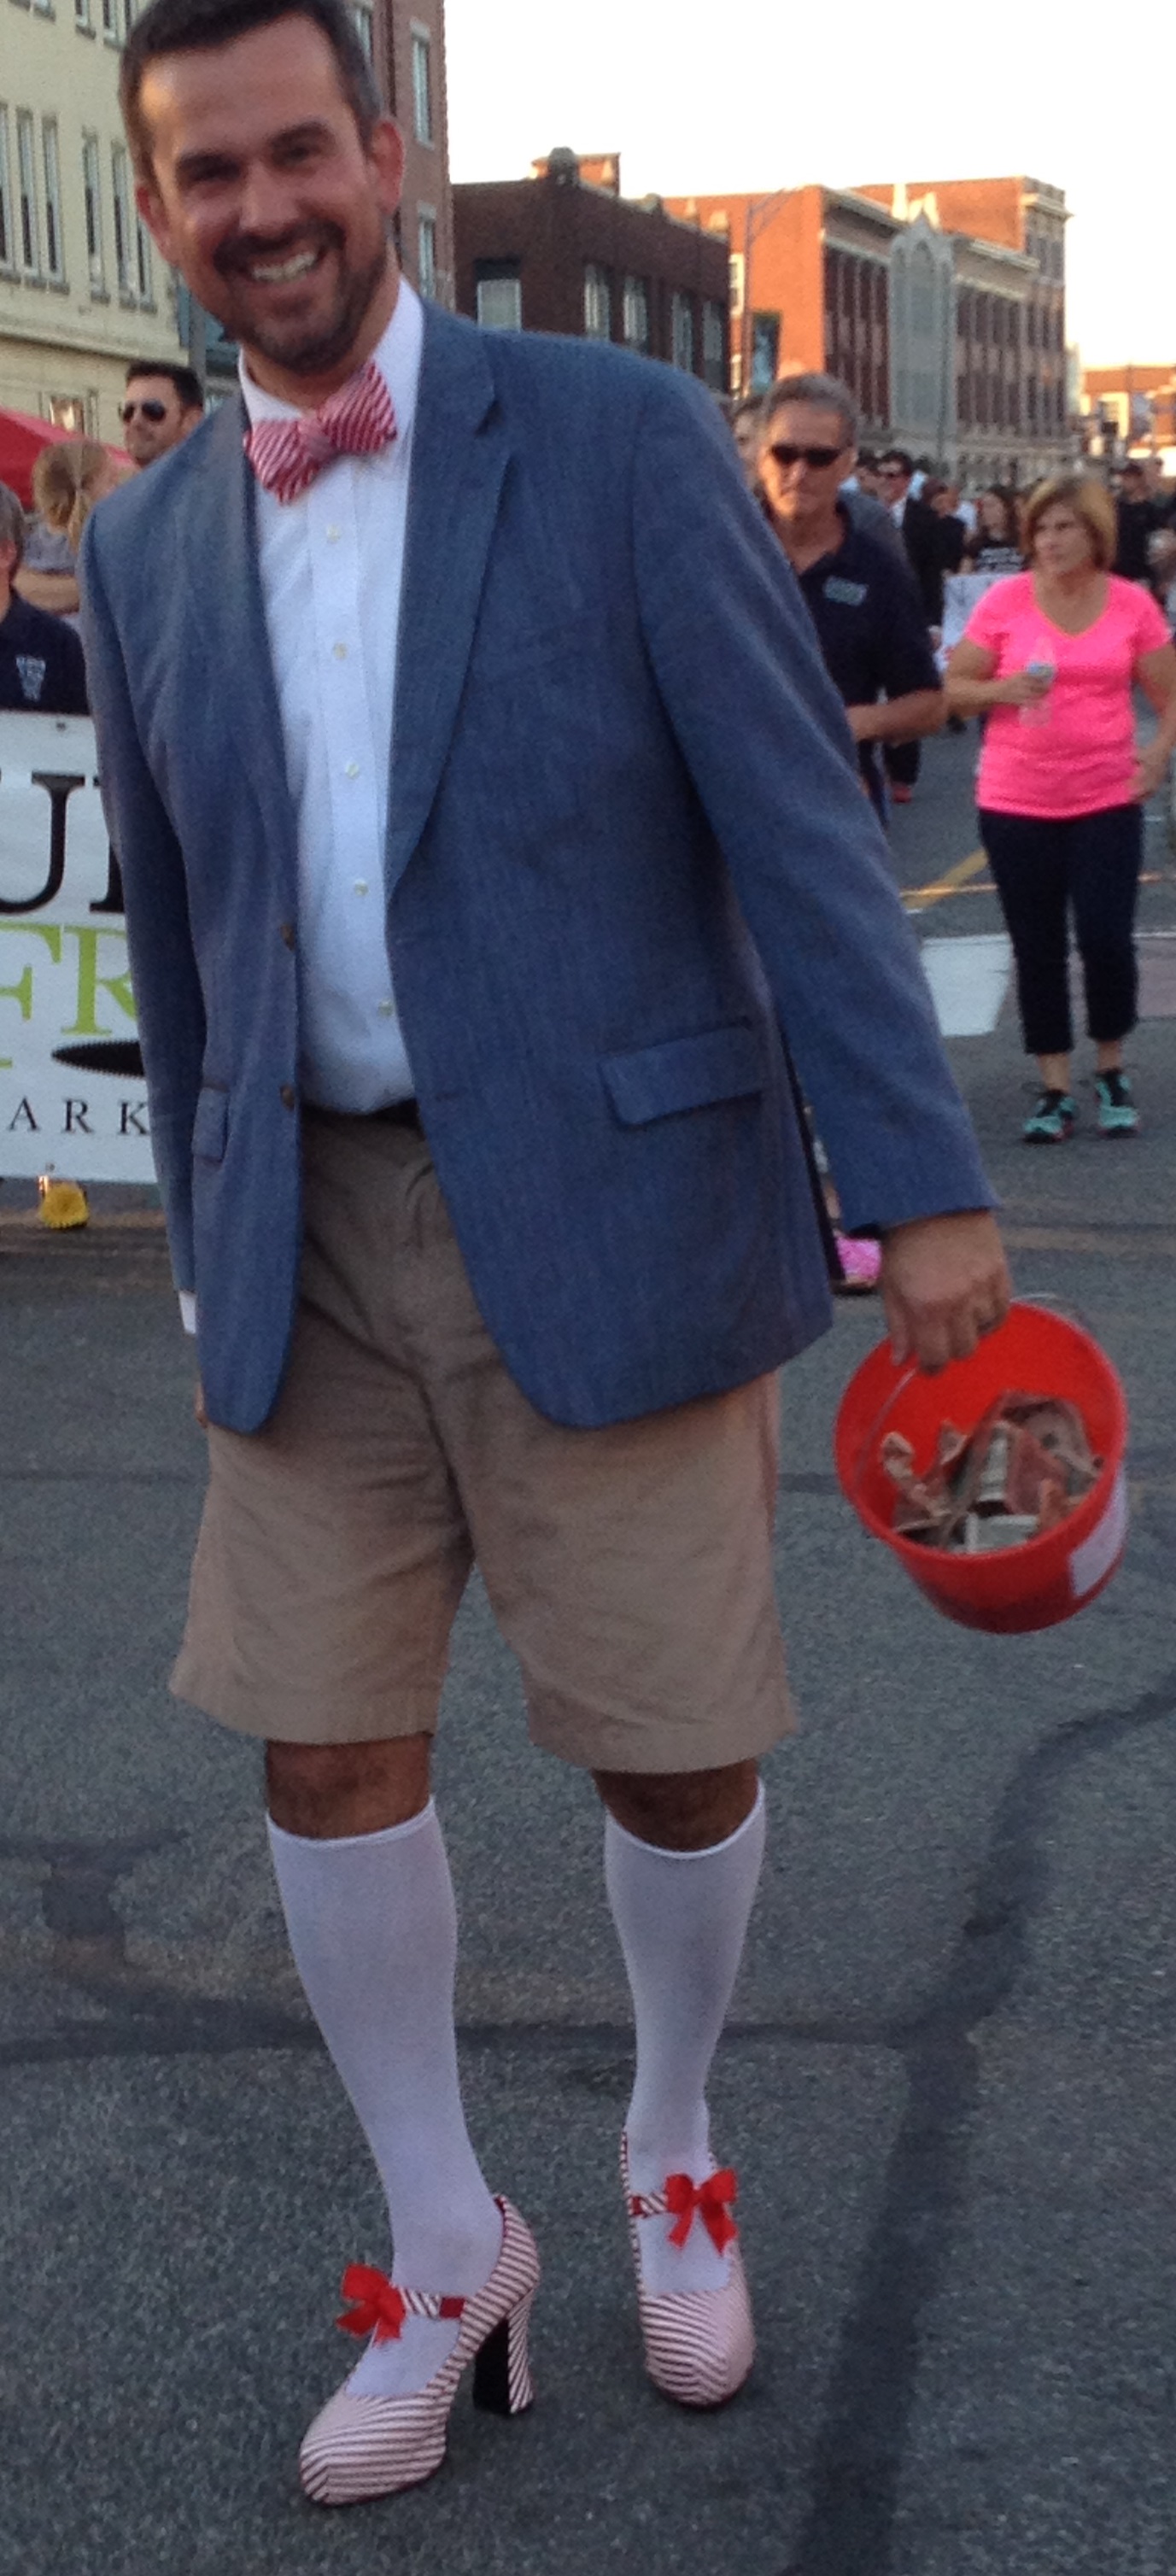 Walk a Mile 2015 walker with snazzy socks and shoes